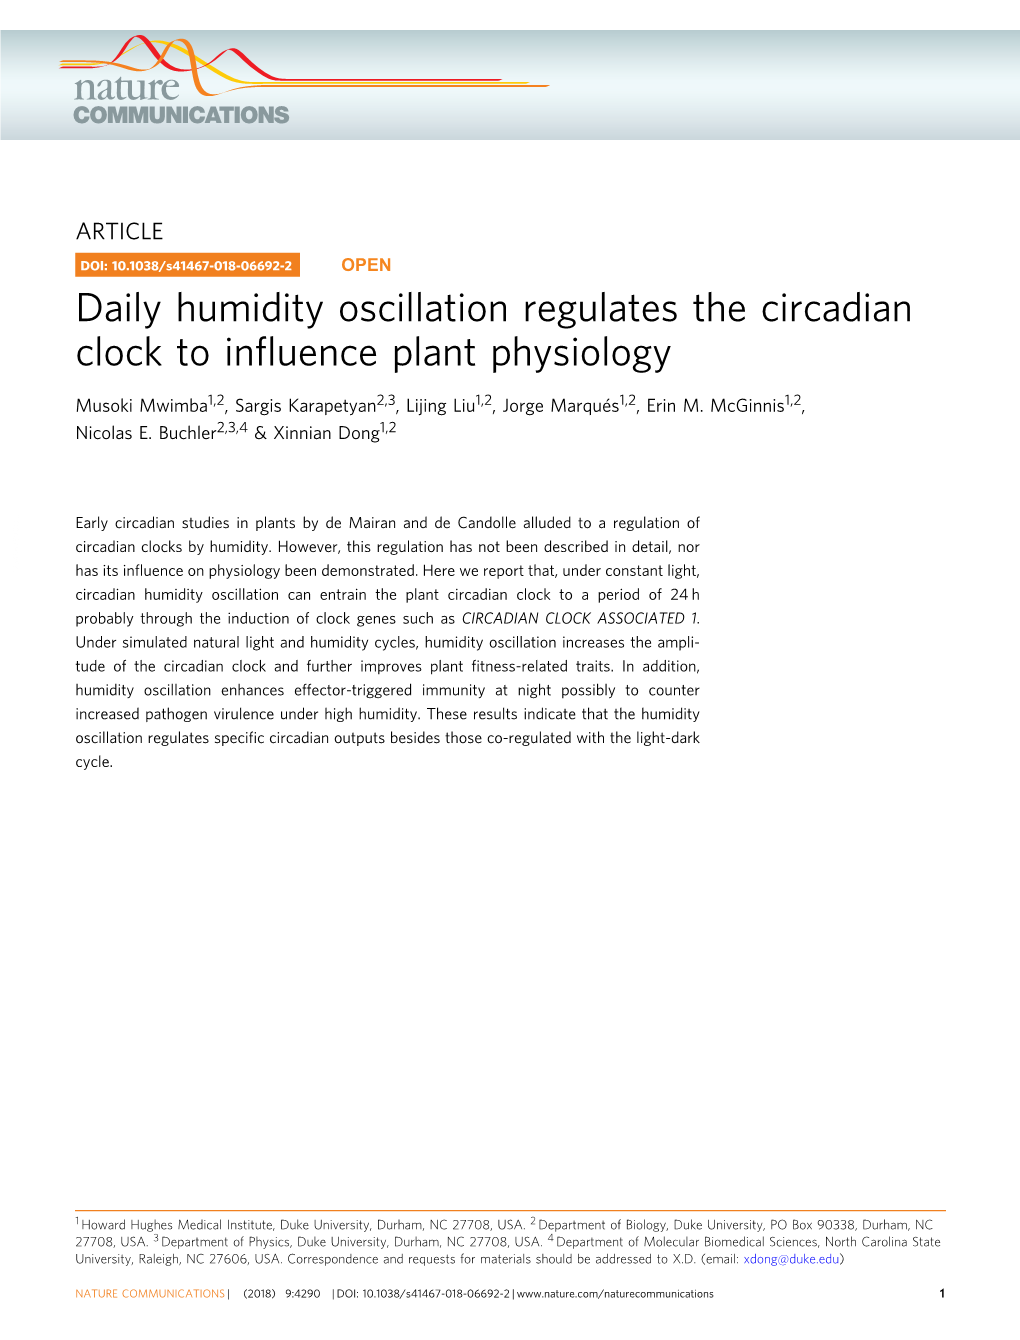 Daily Humidity Oscillation Regulates the Circadian Clock to Influence Plant